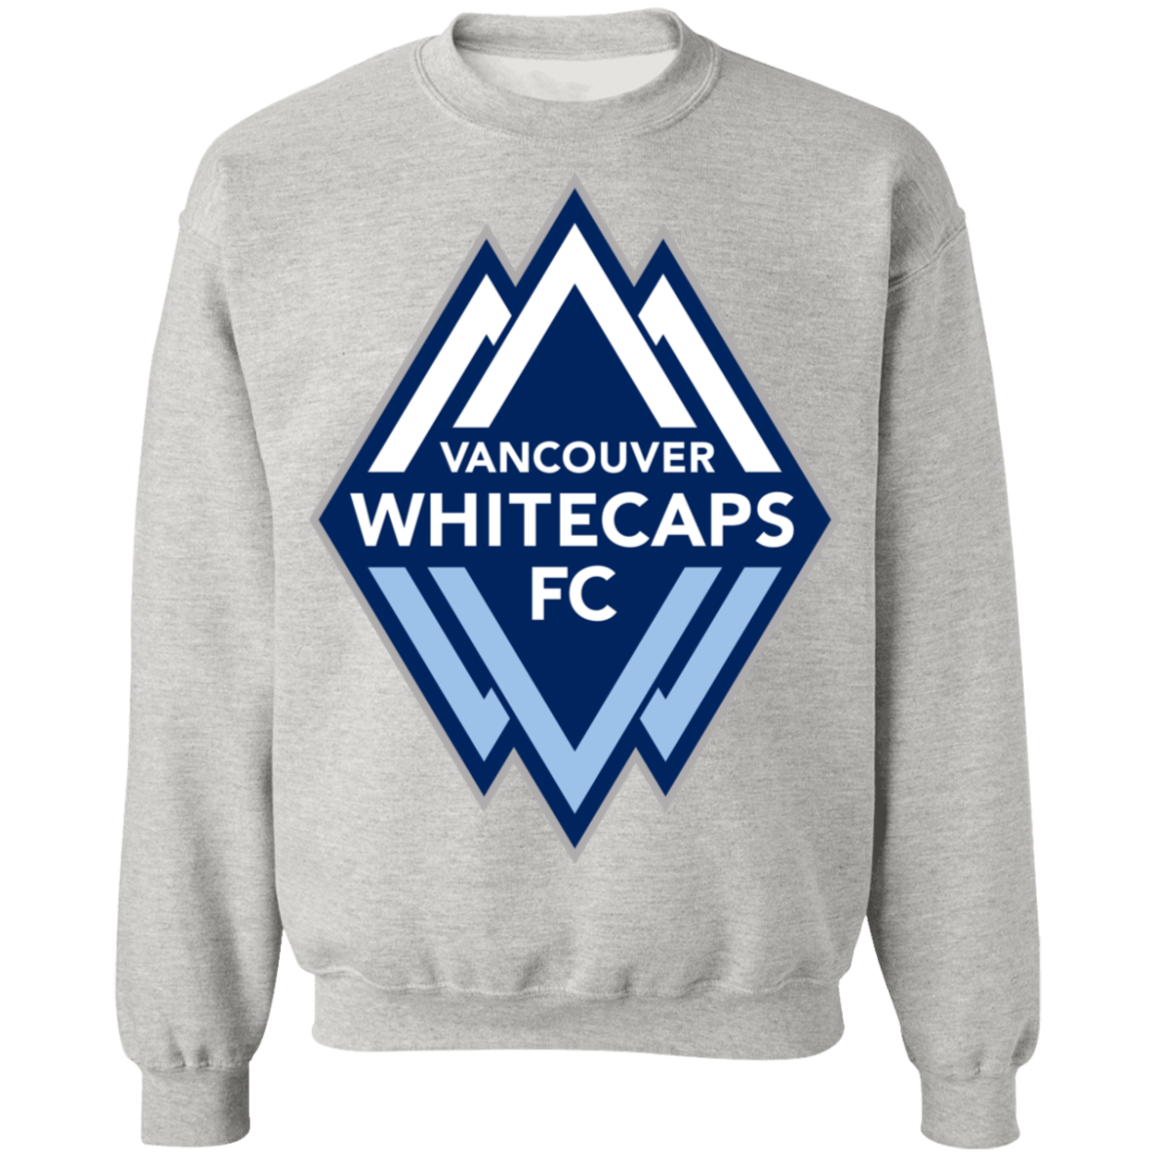 Vancouver whitecaps fc home is vancouver shirt, hoodie, longsleeve, sweater